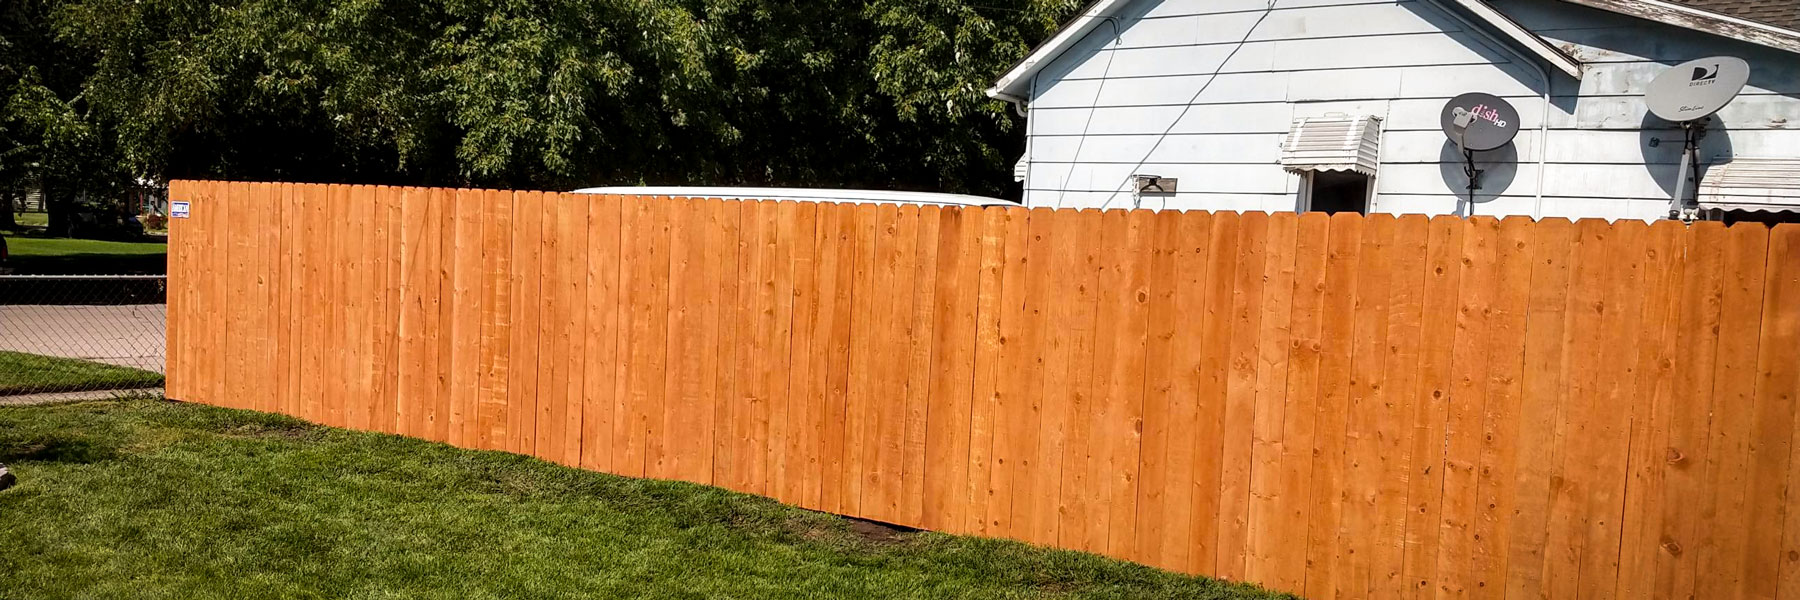 Grand Island fence company residential fencing contractors Nebraska wood fencing cedar western red cedar treated pine white red yellow CCA  ACQ2 incense fir 2x4 1x6 2" x 4"  1" x 6"  nails stain solid privacy picket scalloped board on board shadow box pickets rails posts installation panels post caps modern horizontal backyard front yard ranch gate garden diy split rail house lattice old rustic vertical metal post picket dog ear contemporary custom 